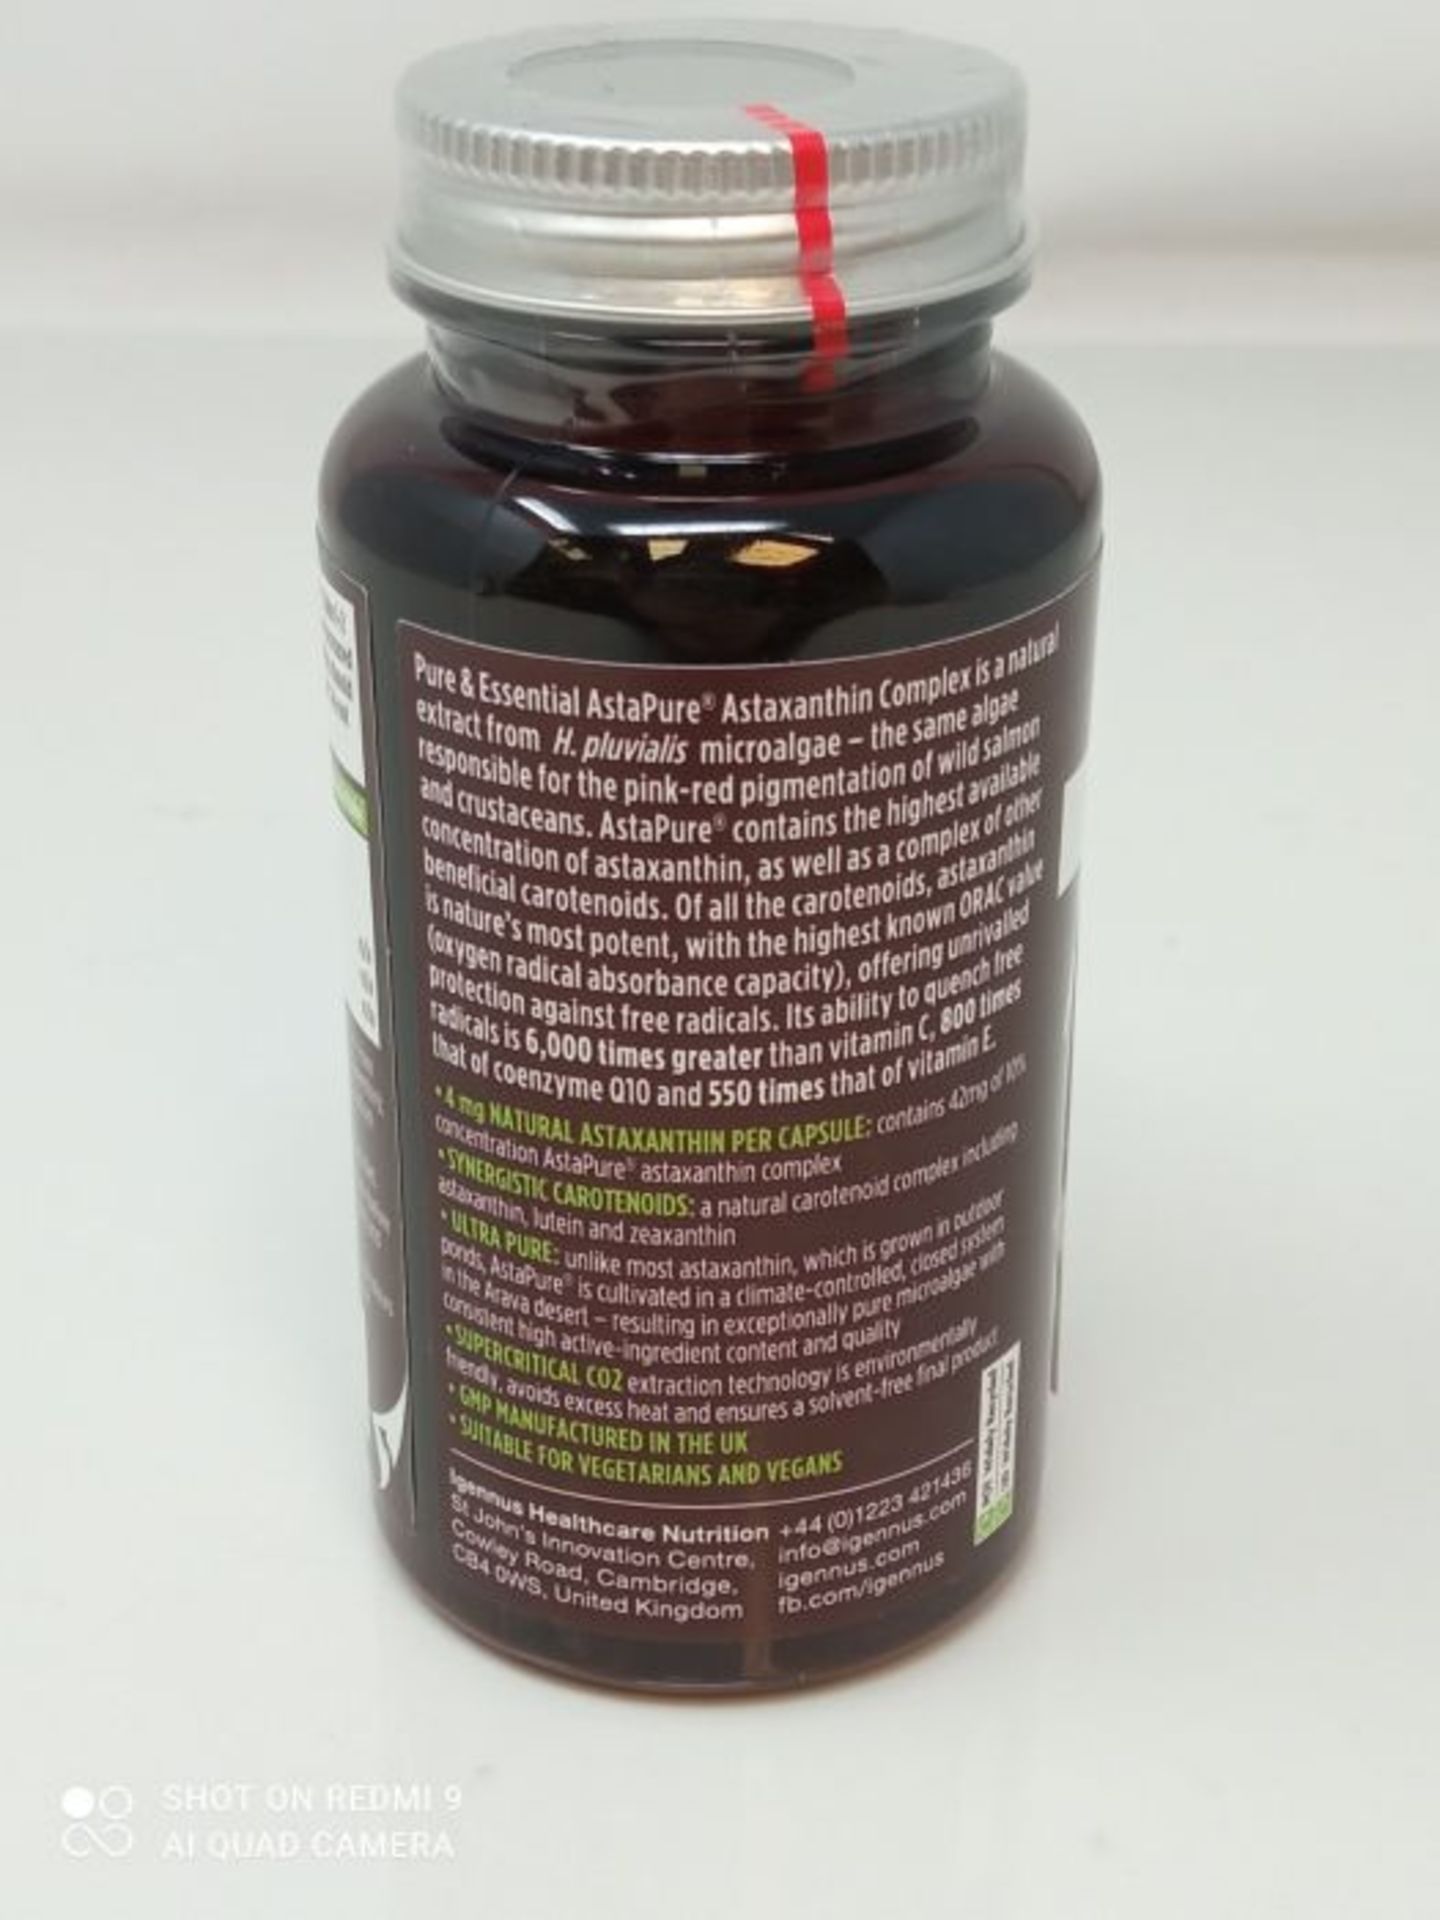 Pure & Essential Astaxanthin Complex, 42 mg Astapure Providing 4 mg H. Pluvialis Astax - Image 3 of 3